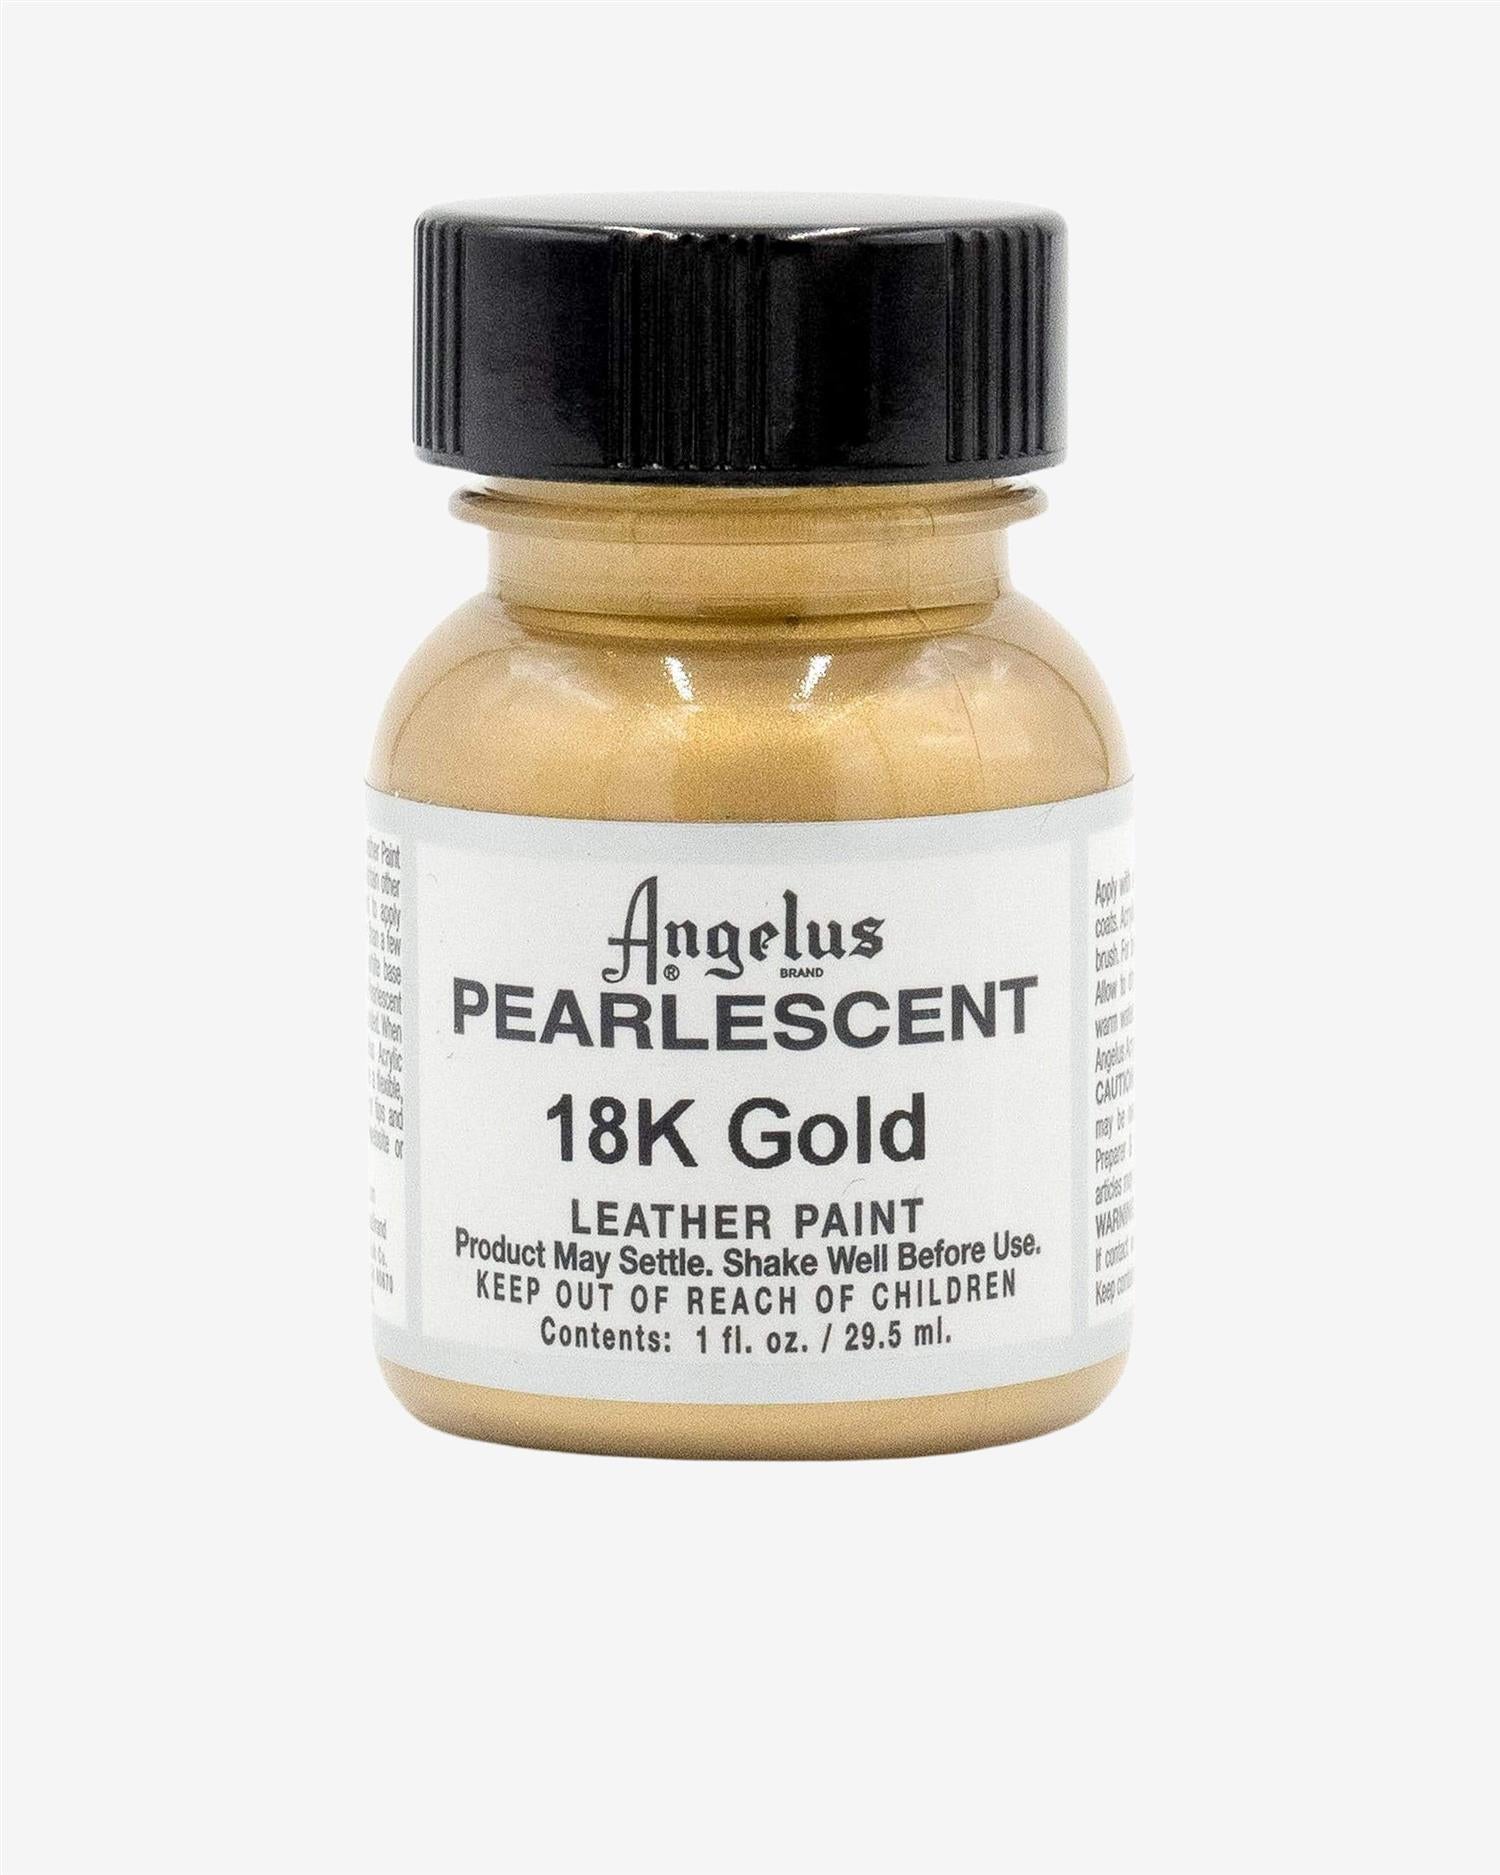 PEARLESCENT LEATHER PAINT - 18K GOLD